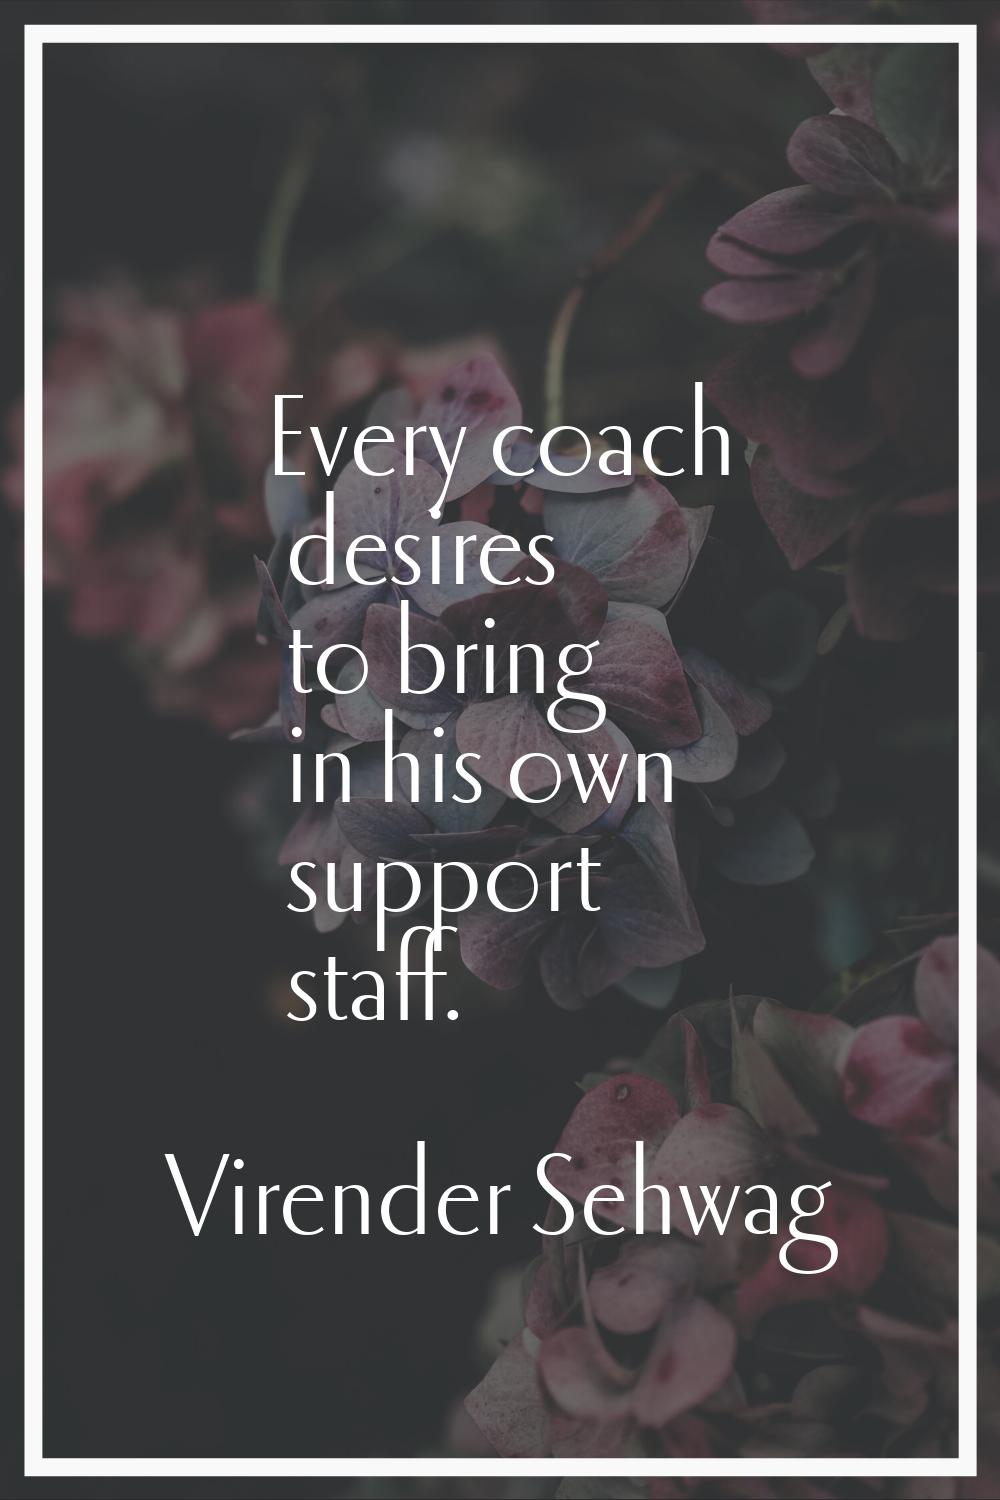 Every coach desires to bring in his own support staff.